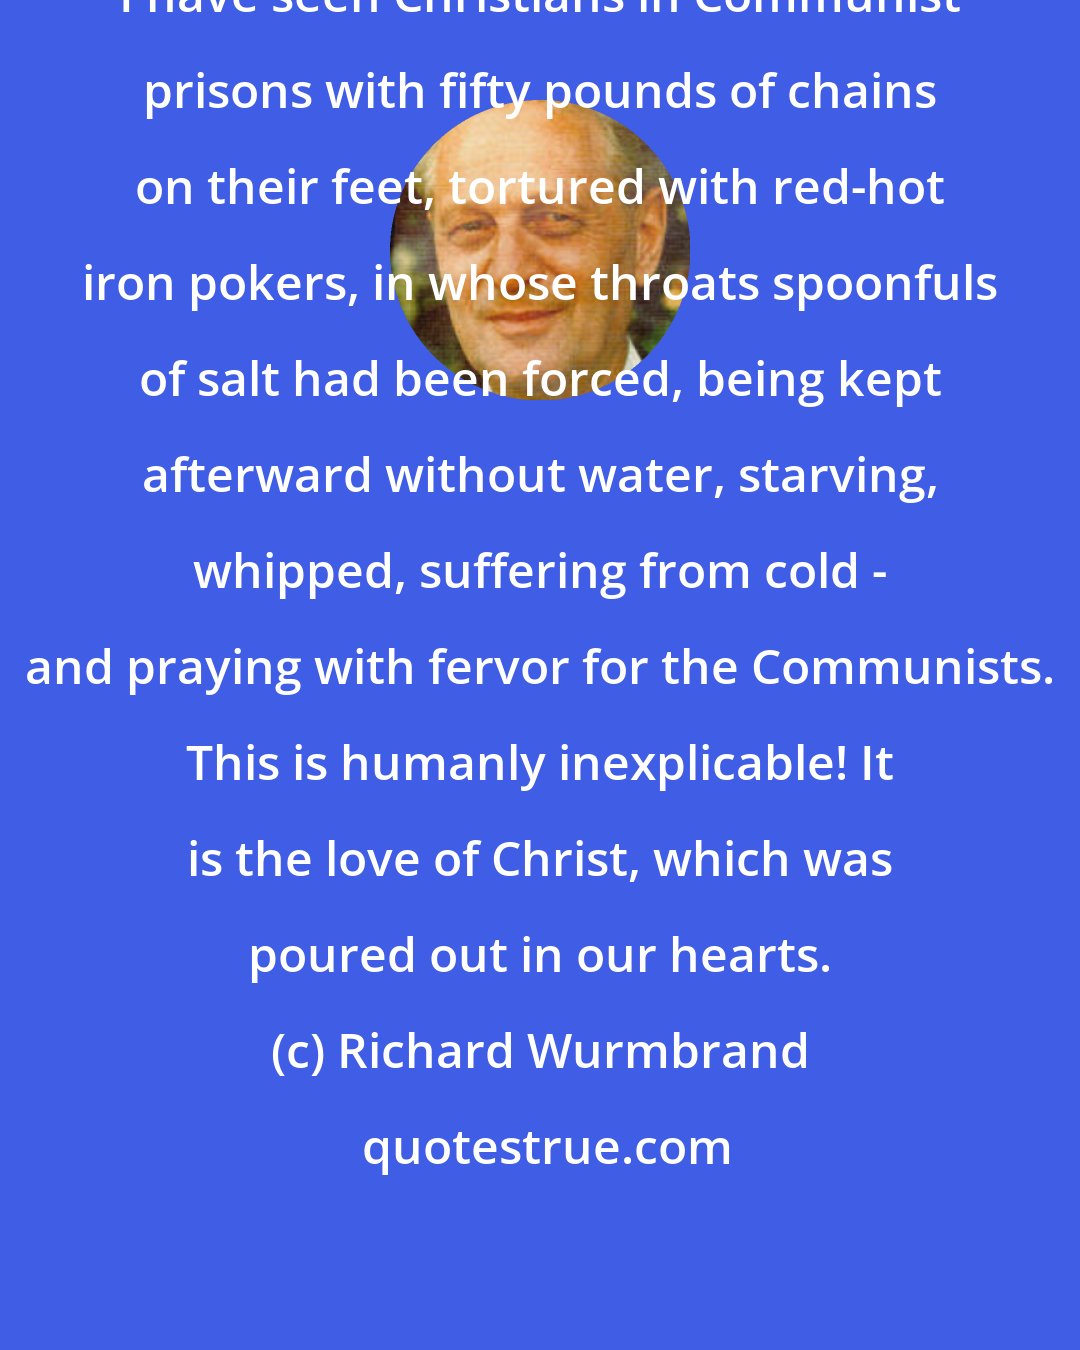 Richard Wurmbrand: I have seen Christians in Communist prisons with fifty pounds of chains on their feet, tortured with red-hot iron pokers, in whose throats spoonfuls of salt had been forced, being kept afterward without water, starving, whipped, suffering from cold - and praying with fervor for the Communists. This is humanly inexplicable! It is the love of Christ, which was poured out in our hearts.